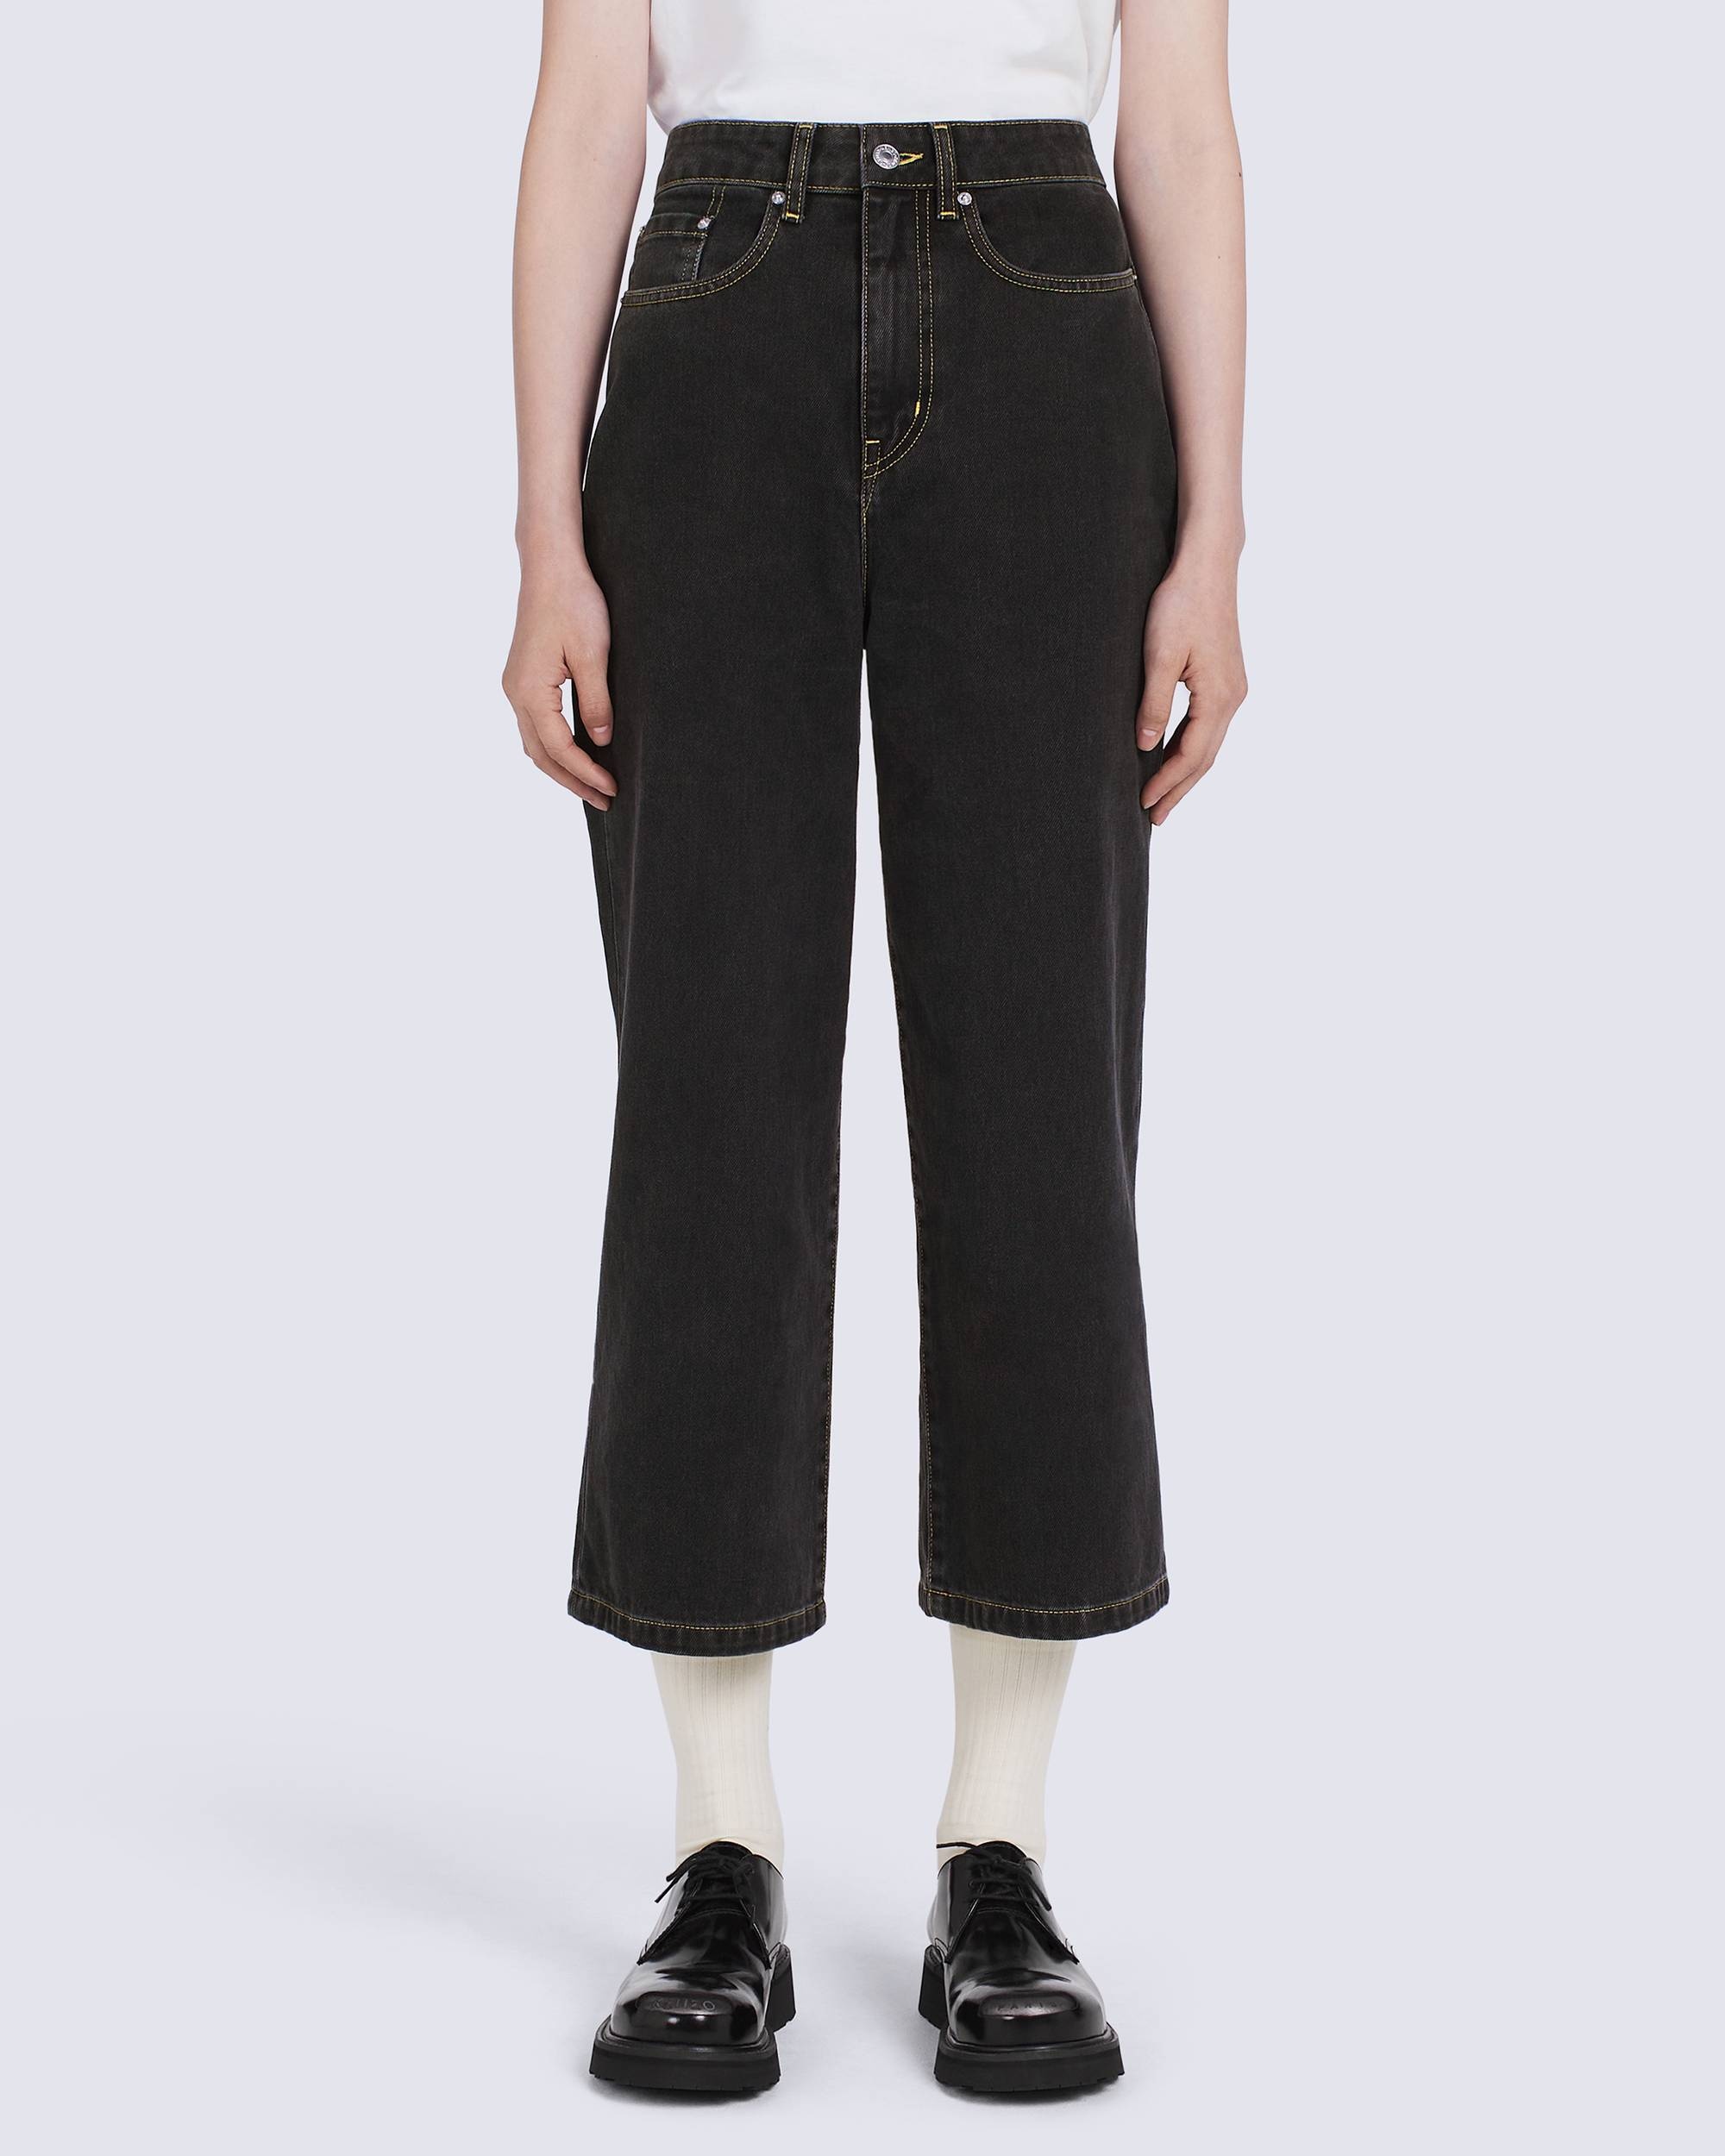 SUMIRE cropped jeans - 5